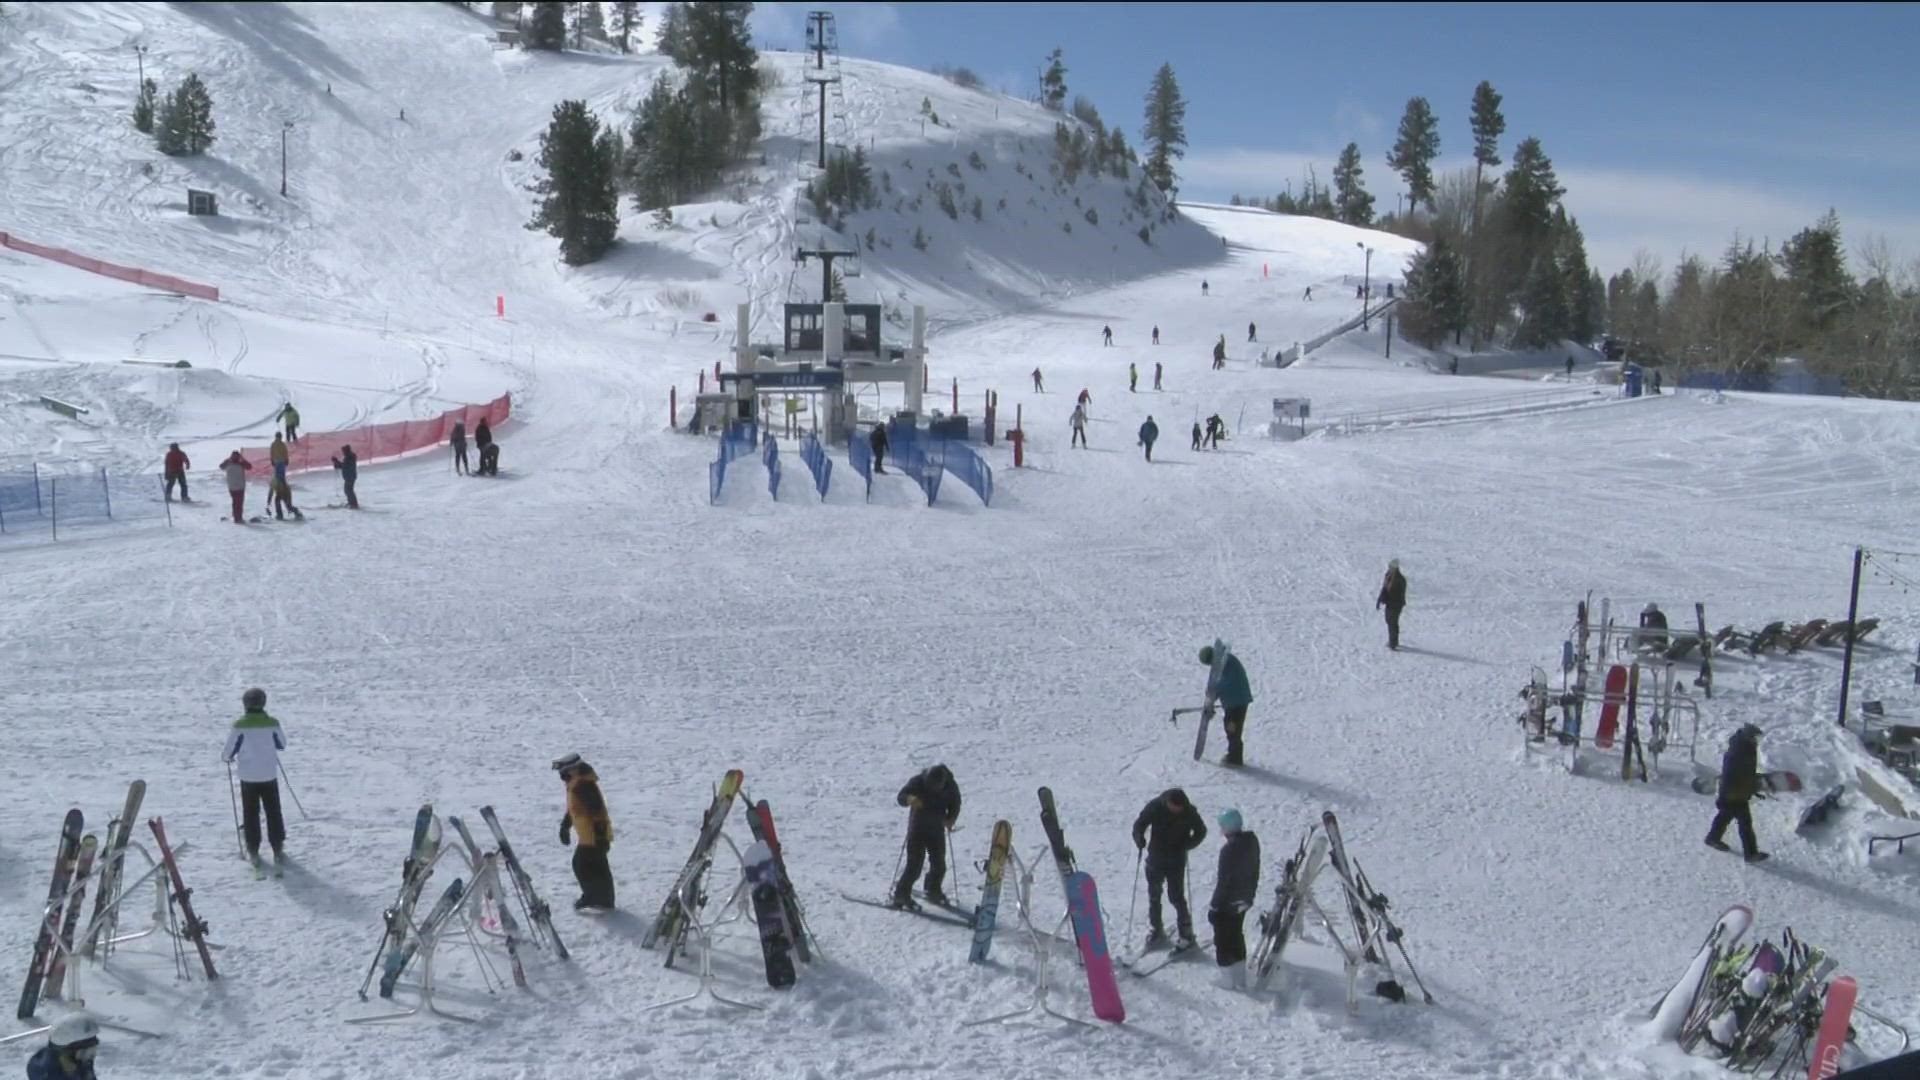 Big business for Bogus Basin - General Manager Brad Wilson said the snow amounts have been optimal with the "most consistent conditions...seen in seven years."